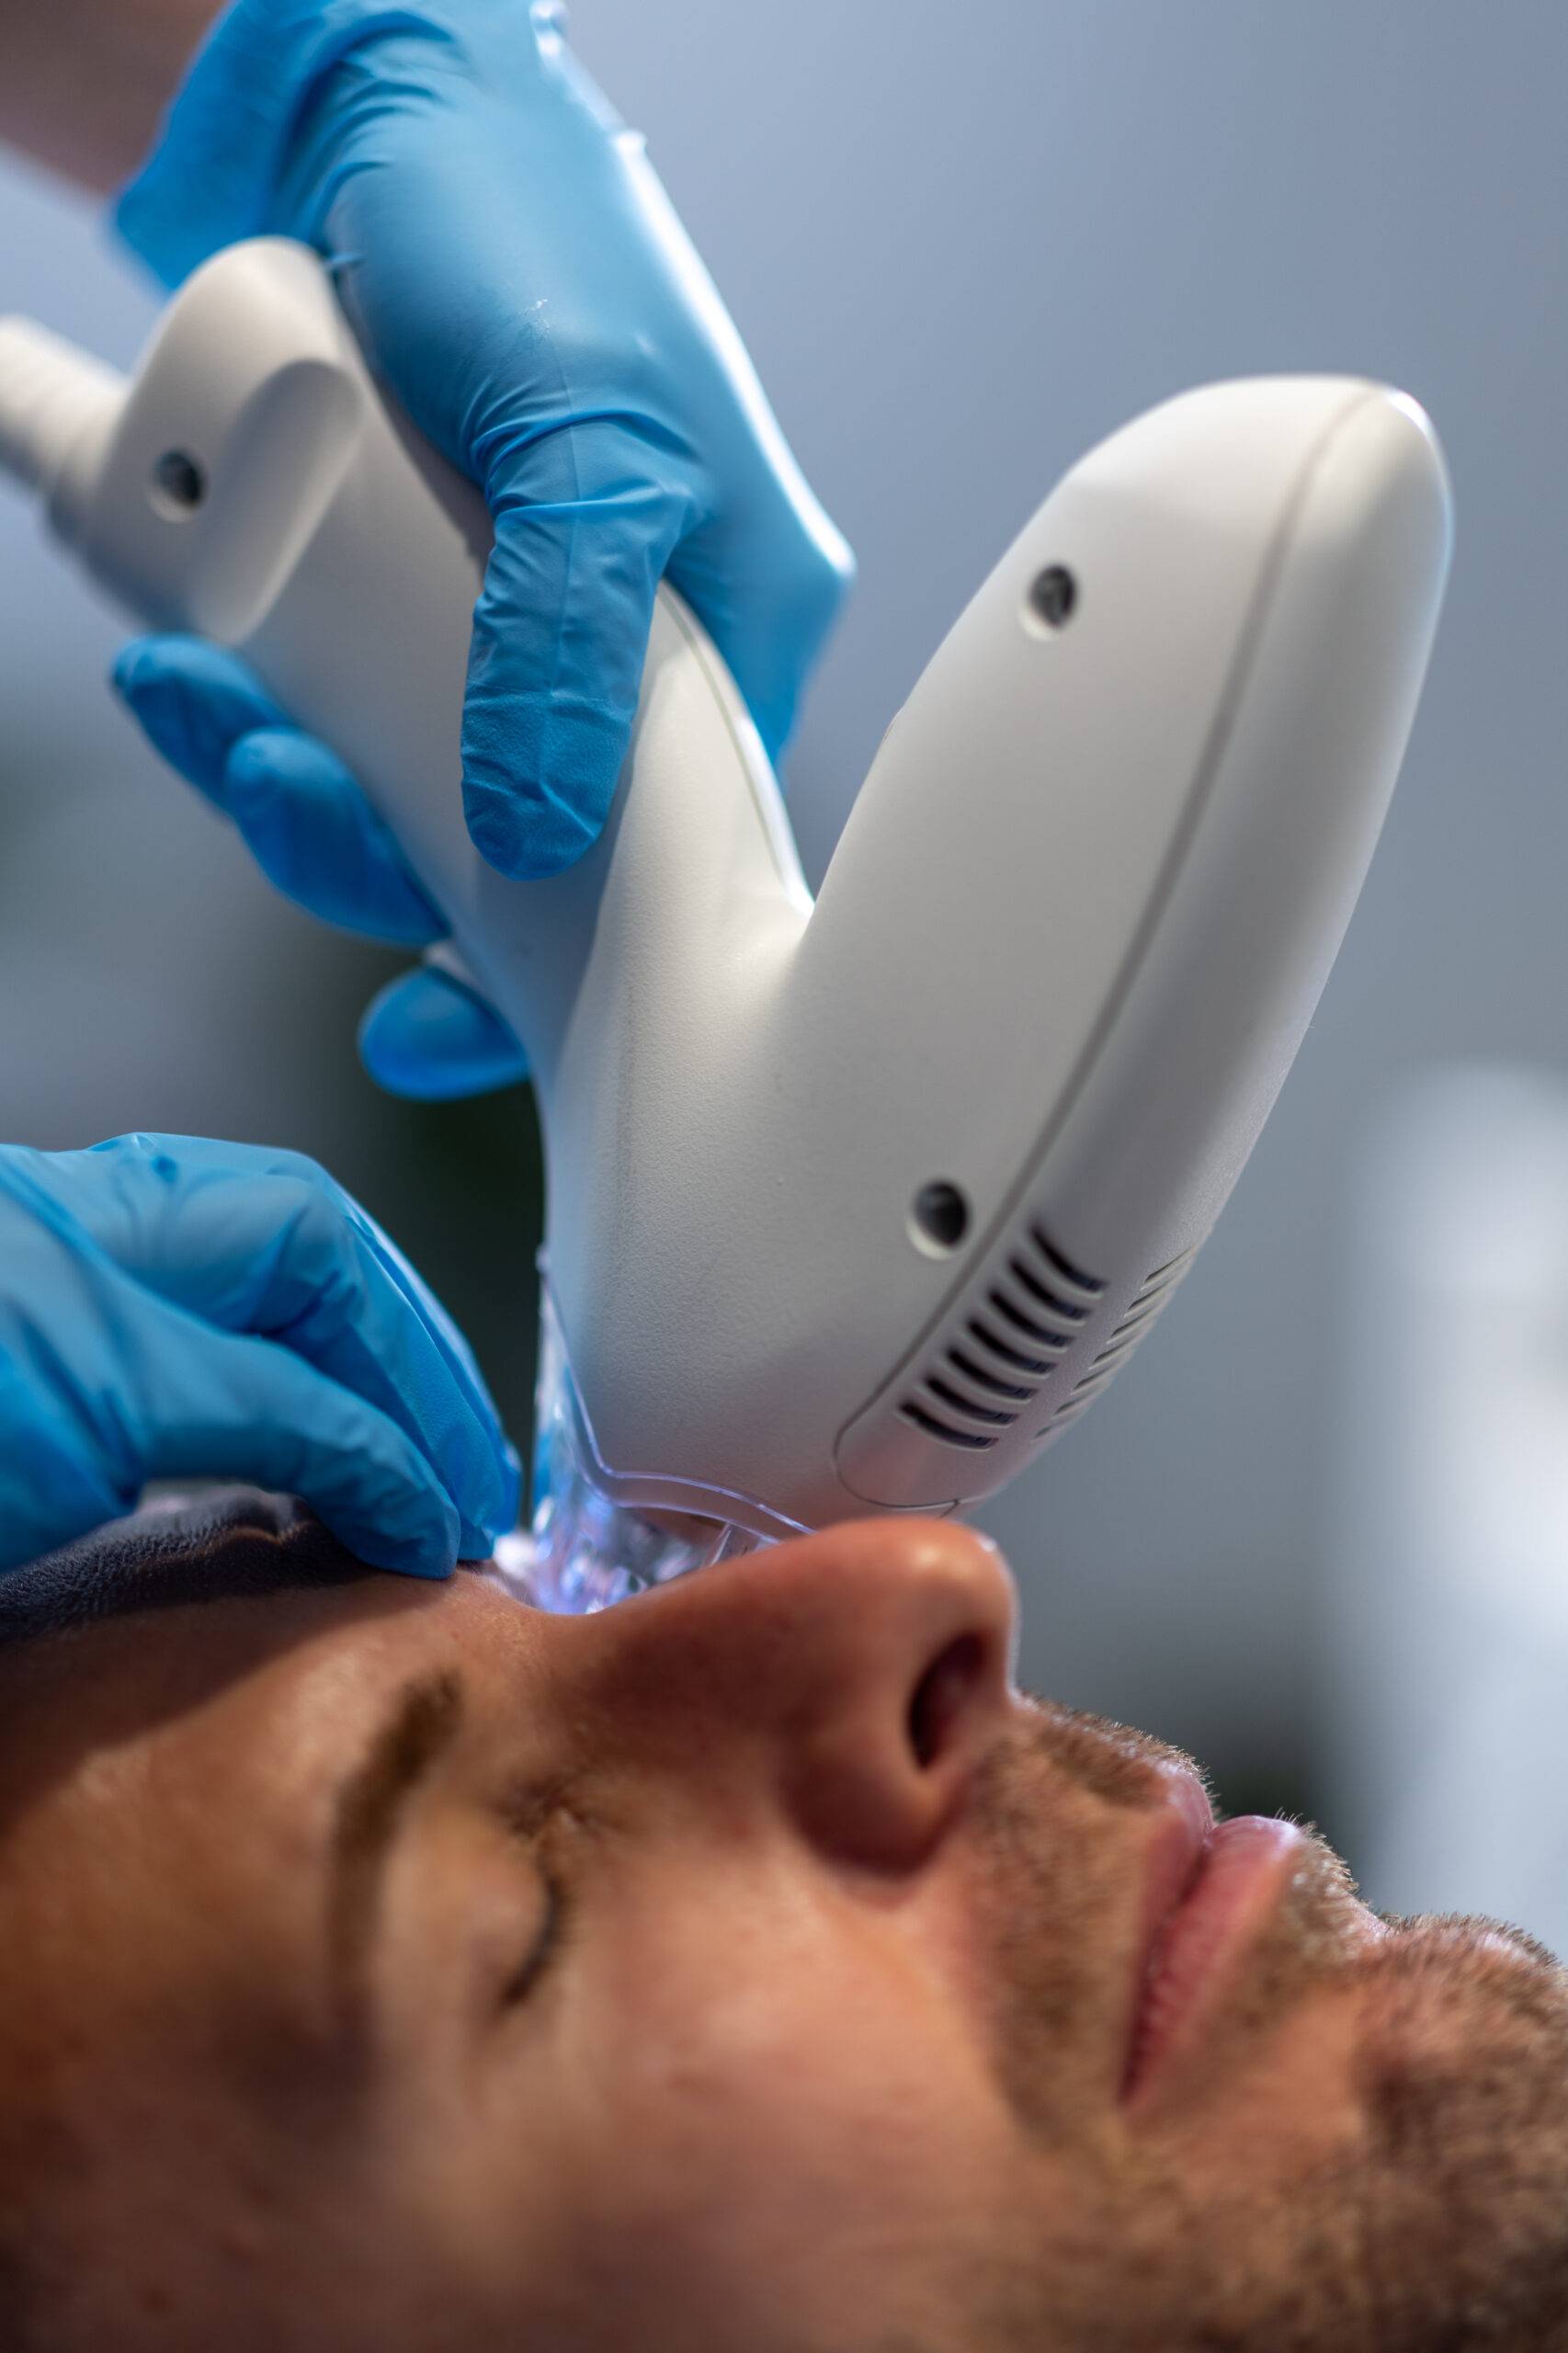 A close-up view of a man undergoing a facial treatment with a Tixel device, administered by a professional wearing blue gloves. The focus is on the device touching the man's face.